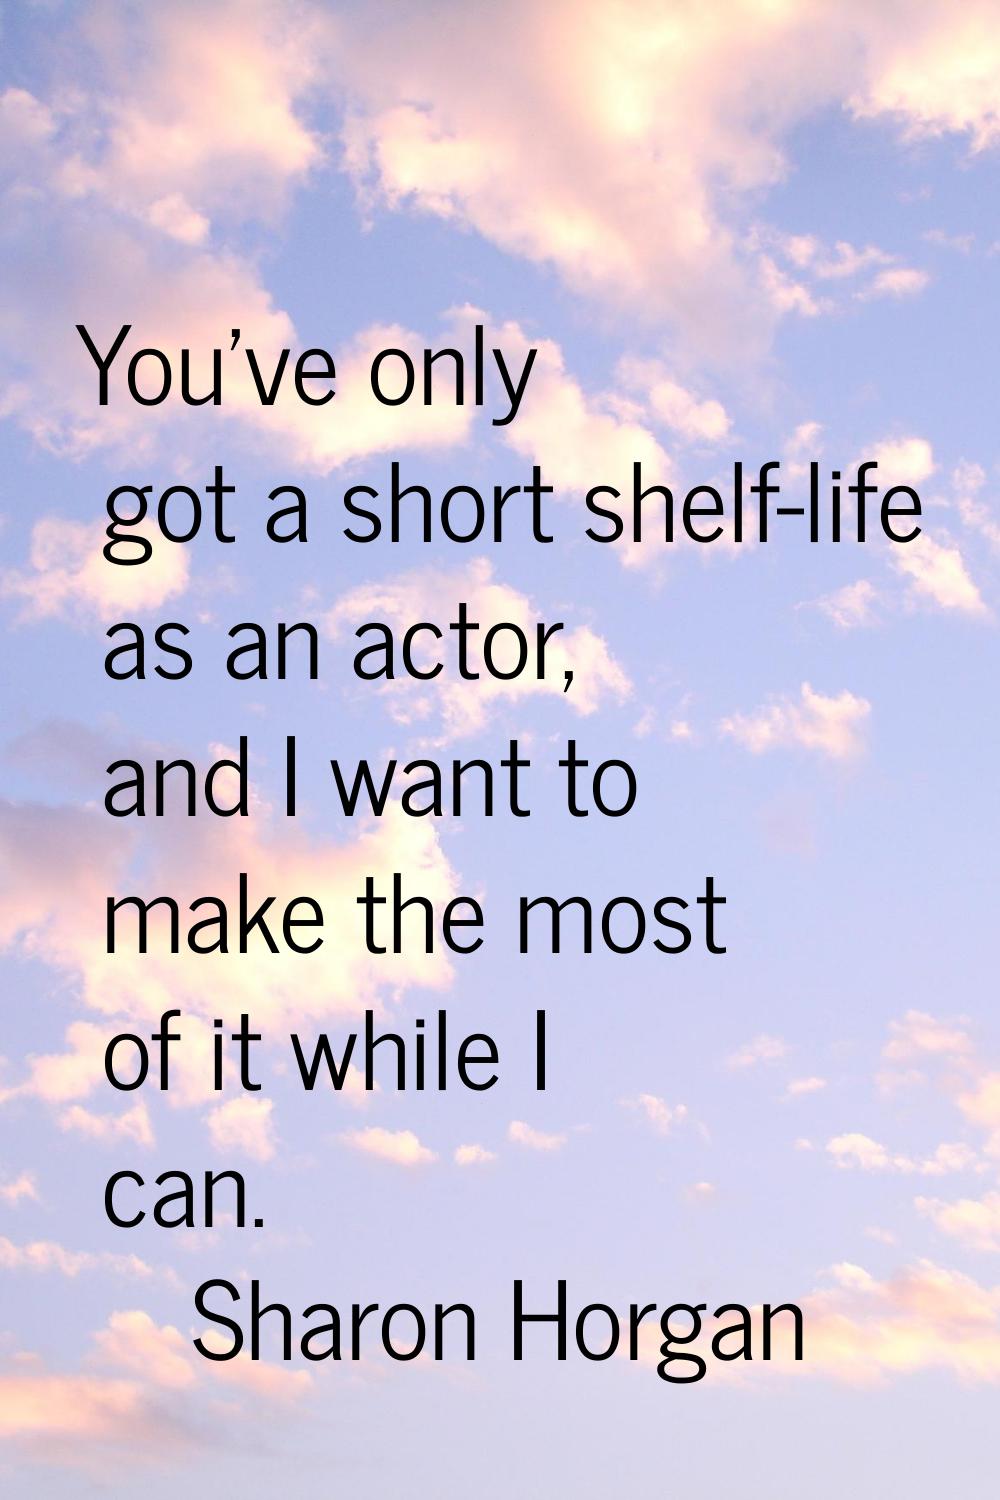 You've only got a short shelf-life as an actor, and I want to make the most of it while I can.